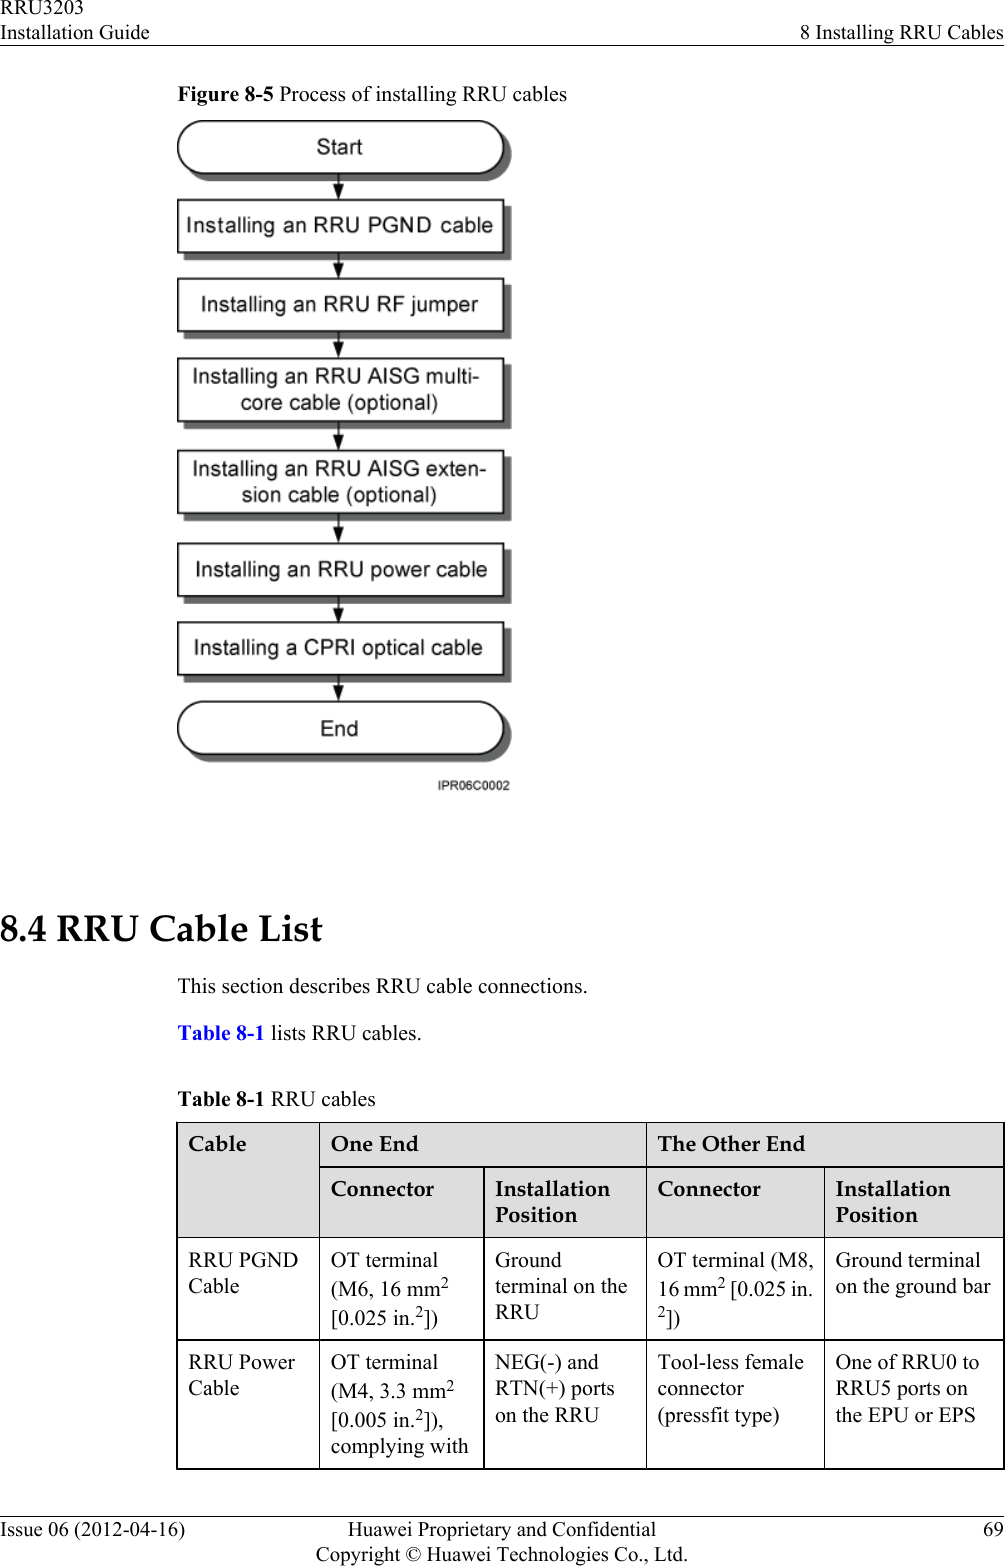 Figure 8-5 Process of installing RRU cables 8.4 RRU Cable ListThis section describes RRU cable connections.Table 8-1 lists RRU cables.Table 8-1 RRU cablesCable One End The Other EndConnector InstallationPositionConnector InstallationPositionRRU PGNDCableOT terminal(M6, 16 mm2[0.025 in.2])Groundterminal on theRRUOT terminal (M8,16 mm2 [0.025 in.2])Ground terminalon the ground barRRU PowerCableOT terminal(M4, 3.3 mm2[0.005 in.2]),complying withNEG(-) andRTN(+) portson the RRUTool-less femaleconnector(pressfit type)One of RRU0 toRRU5 ports onthe EPU or EPSRRU3203Installation Guide 8 Installing RRU CablesIssue 06 (2012-04-16) Huawei Proprietary and ConfidentialCopyright © Huawei Technologies Co., Ltd.69